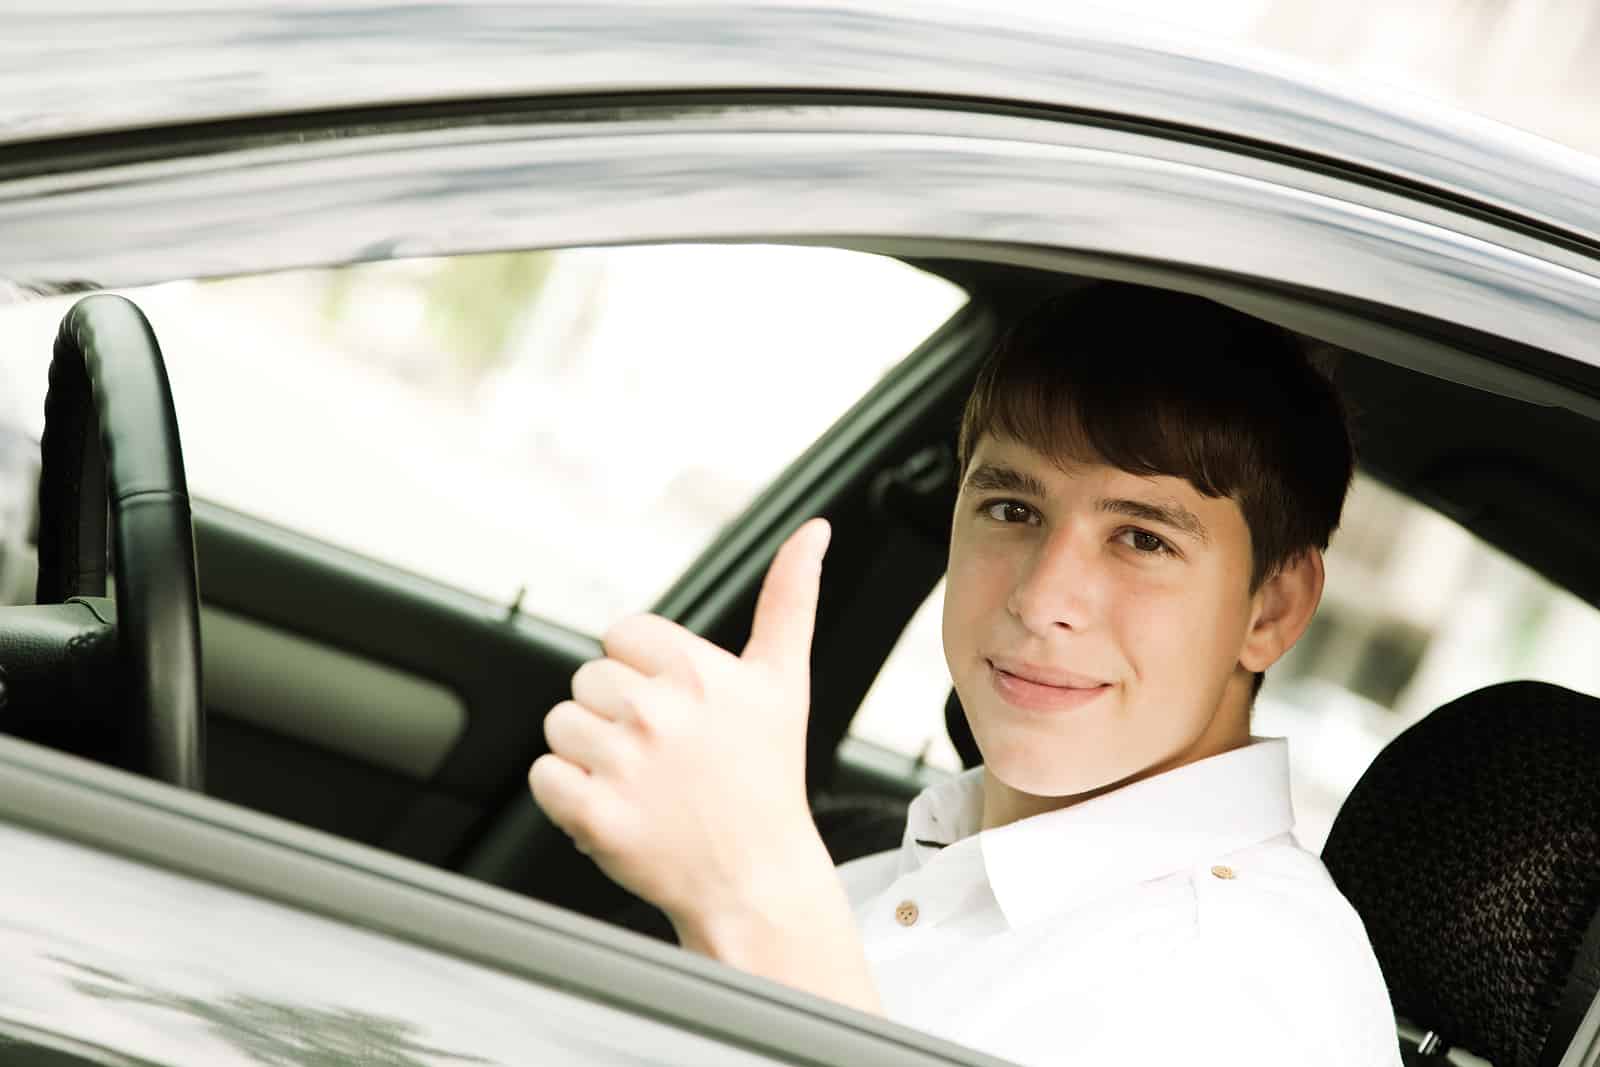 Keys to Defensive Driving for Teens